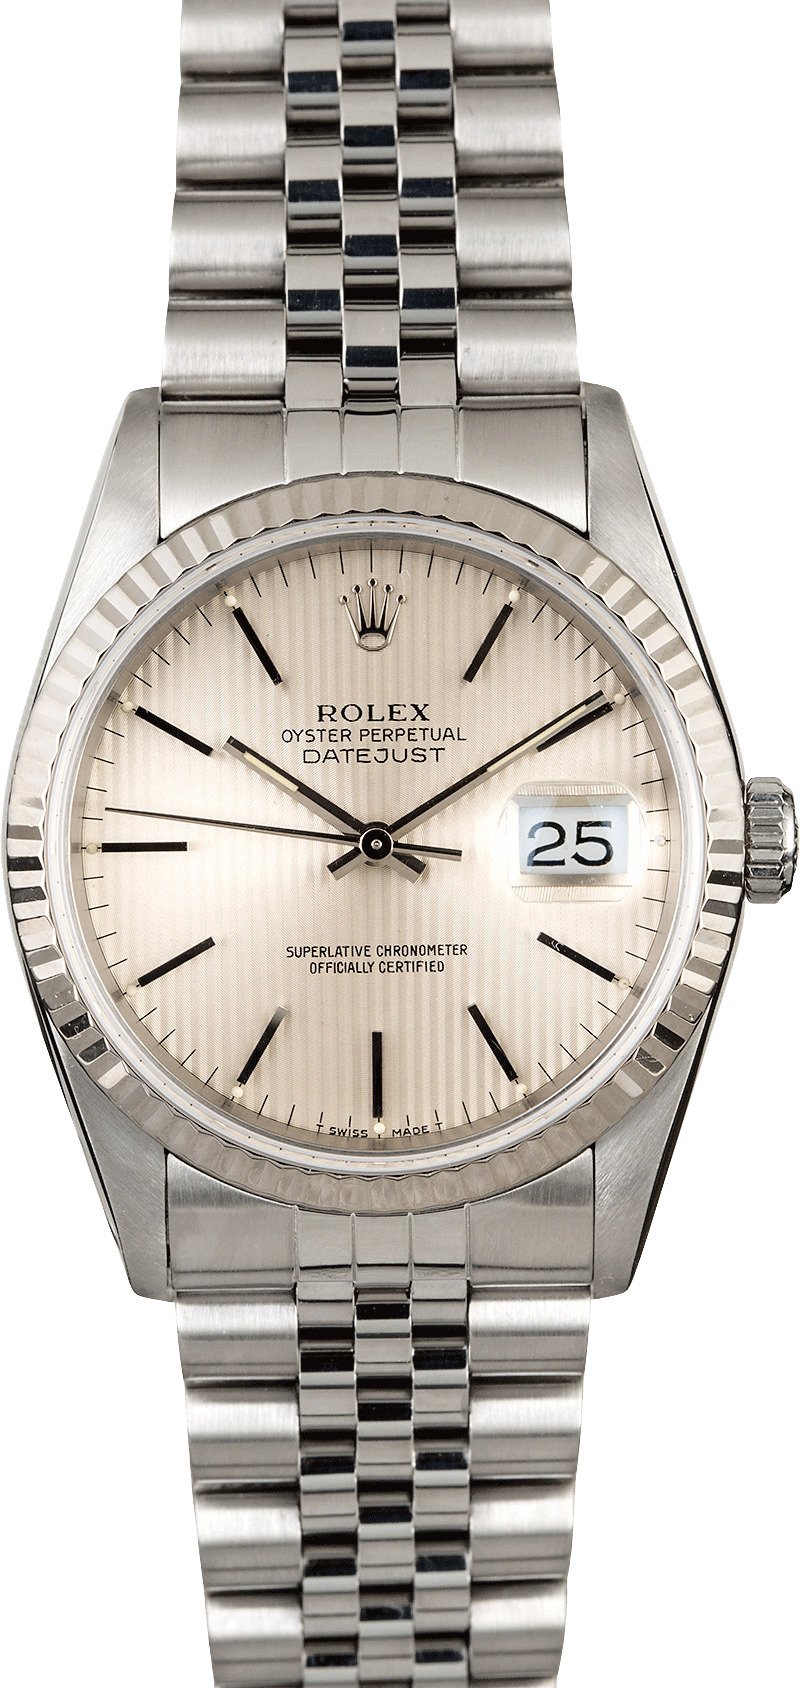 rolex 16234 production years